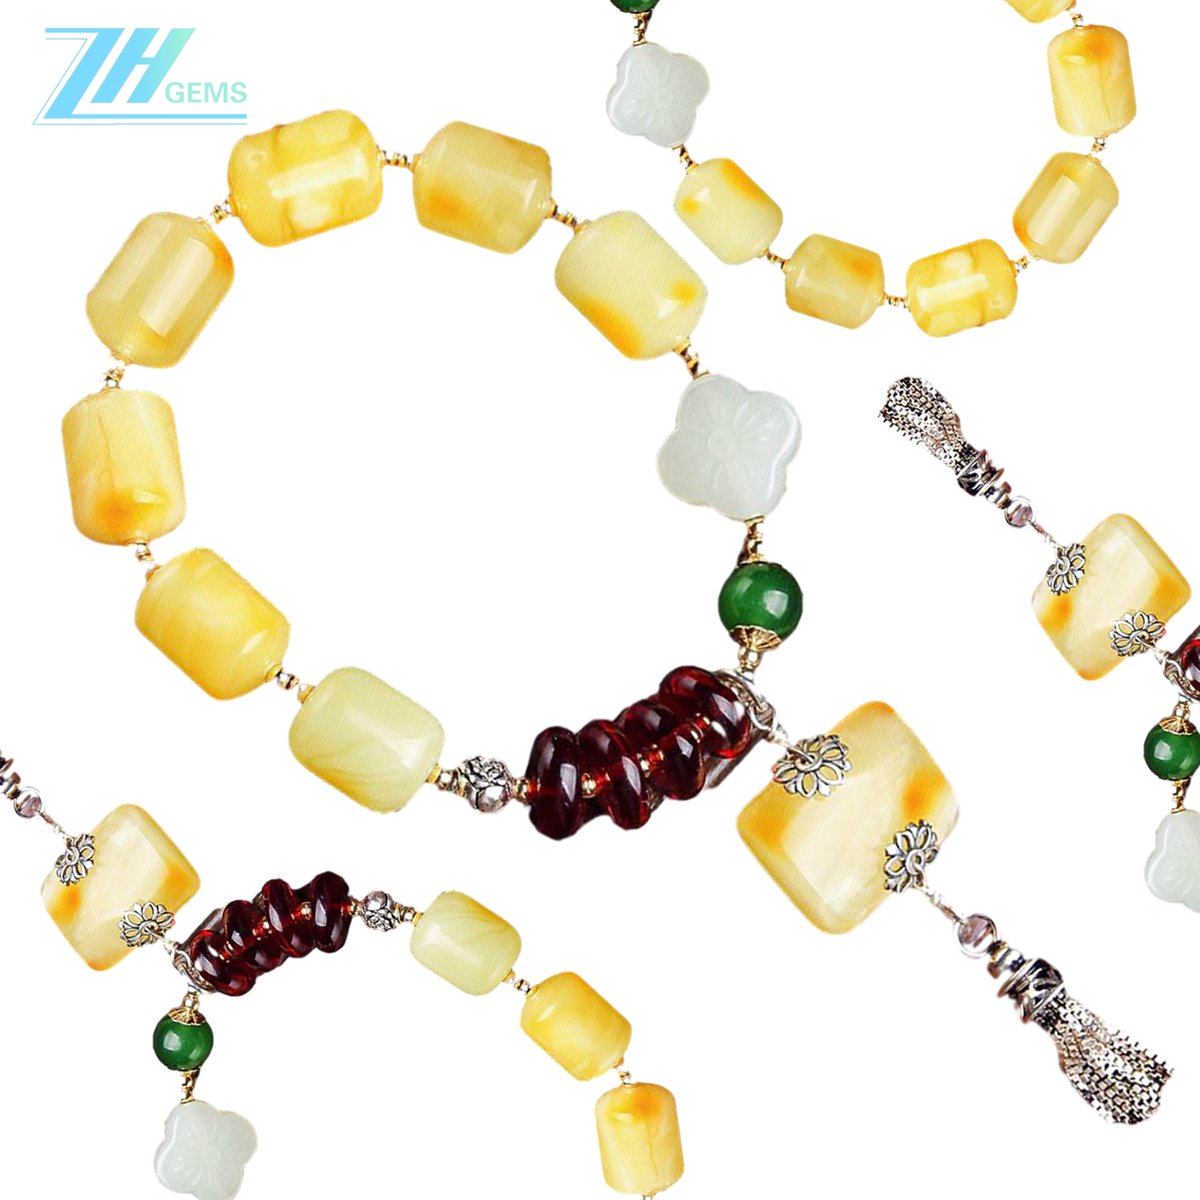 Amber and  Natural turquoise with jade pendant  Gemstone Bracelet  20240308-08-08 #nativeamerican  #nativeamericanjewelry  #nativeamericaninspired  #nativeamericanturquoisejewelry  #turquoisejewelry  #turquoisenecklace  #turquoiseandshell  #handmadenecklace  #oneofakindnecklace